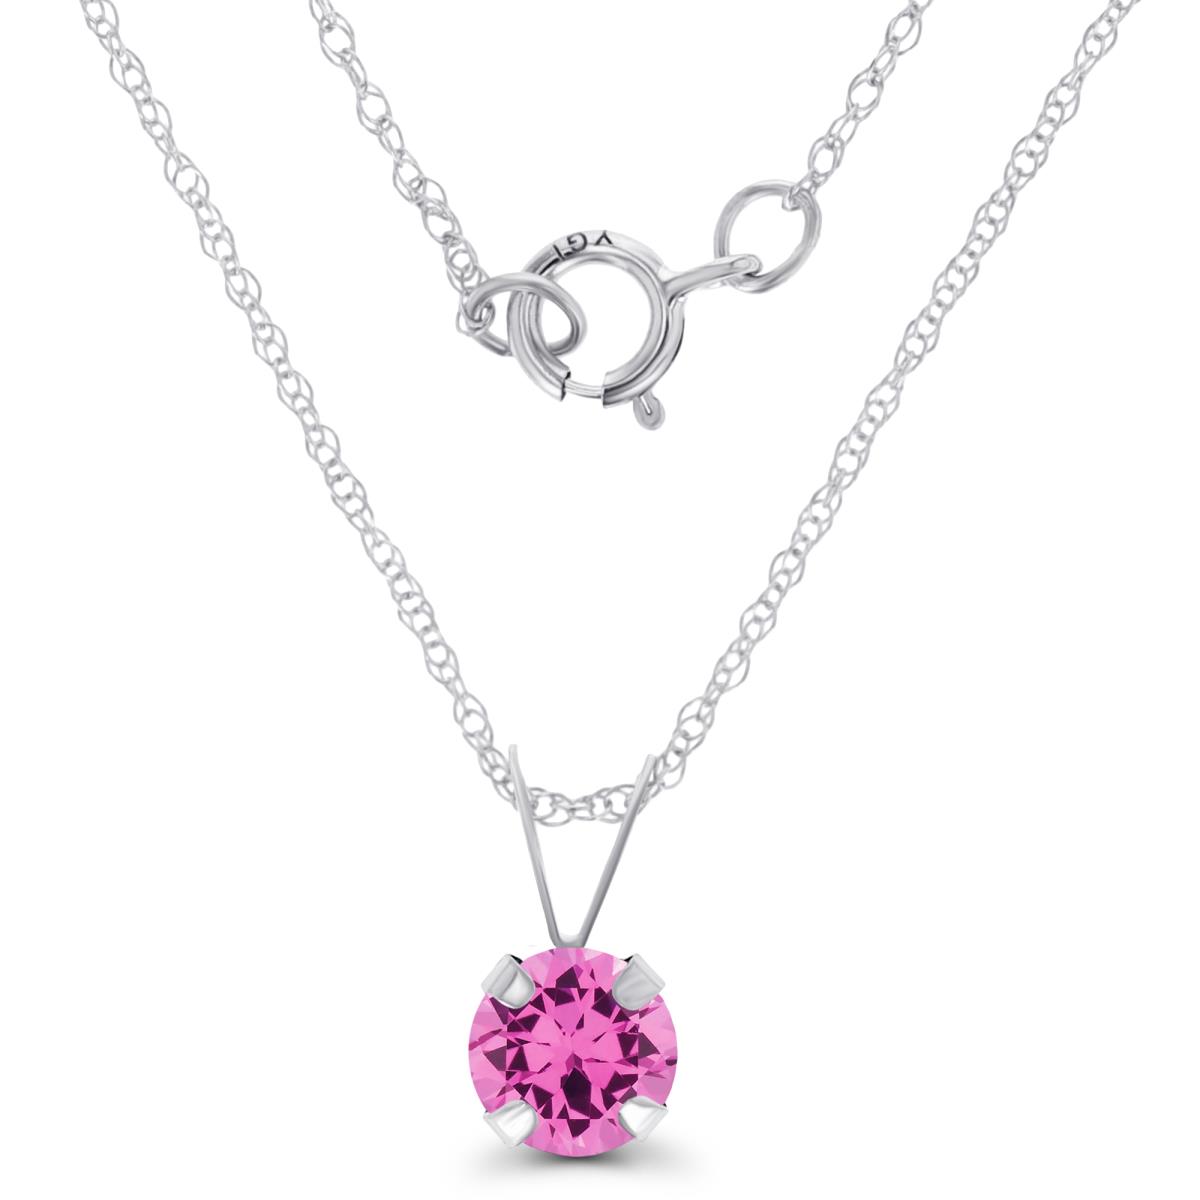 14K White Gold 5mm Round Cr Pink Sapphire 18" Rope Chain Necklace